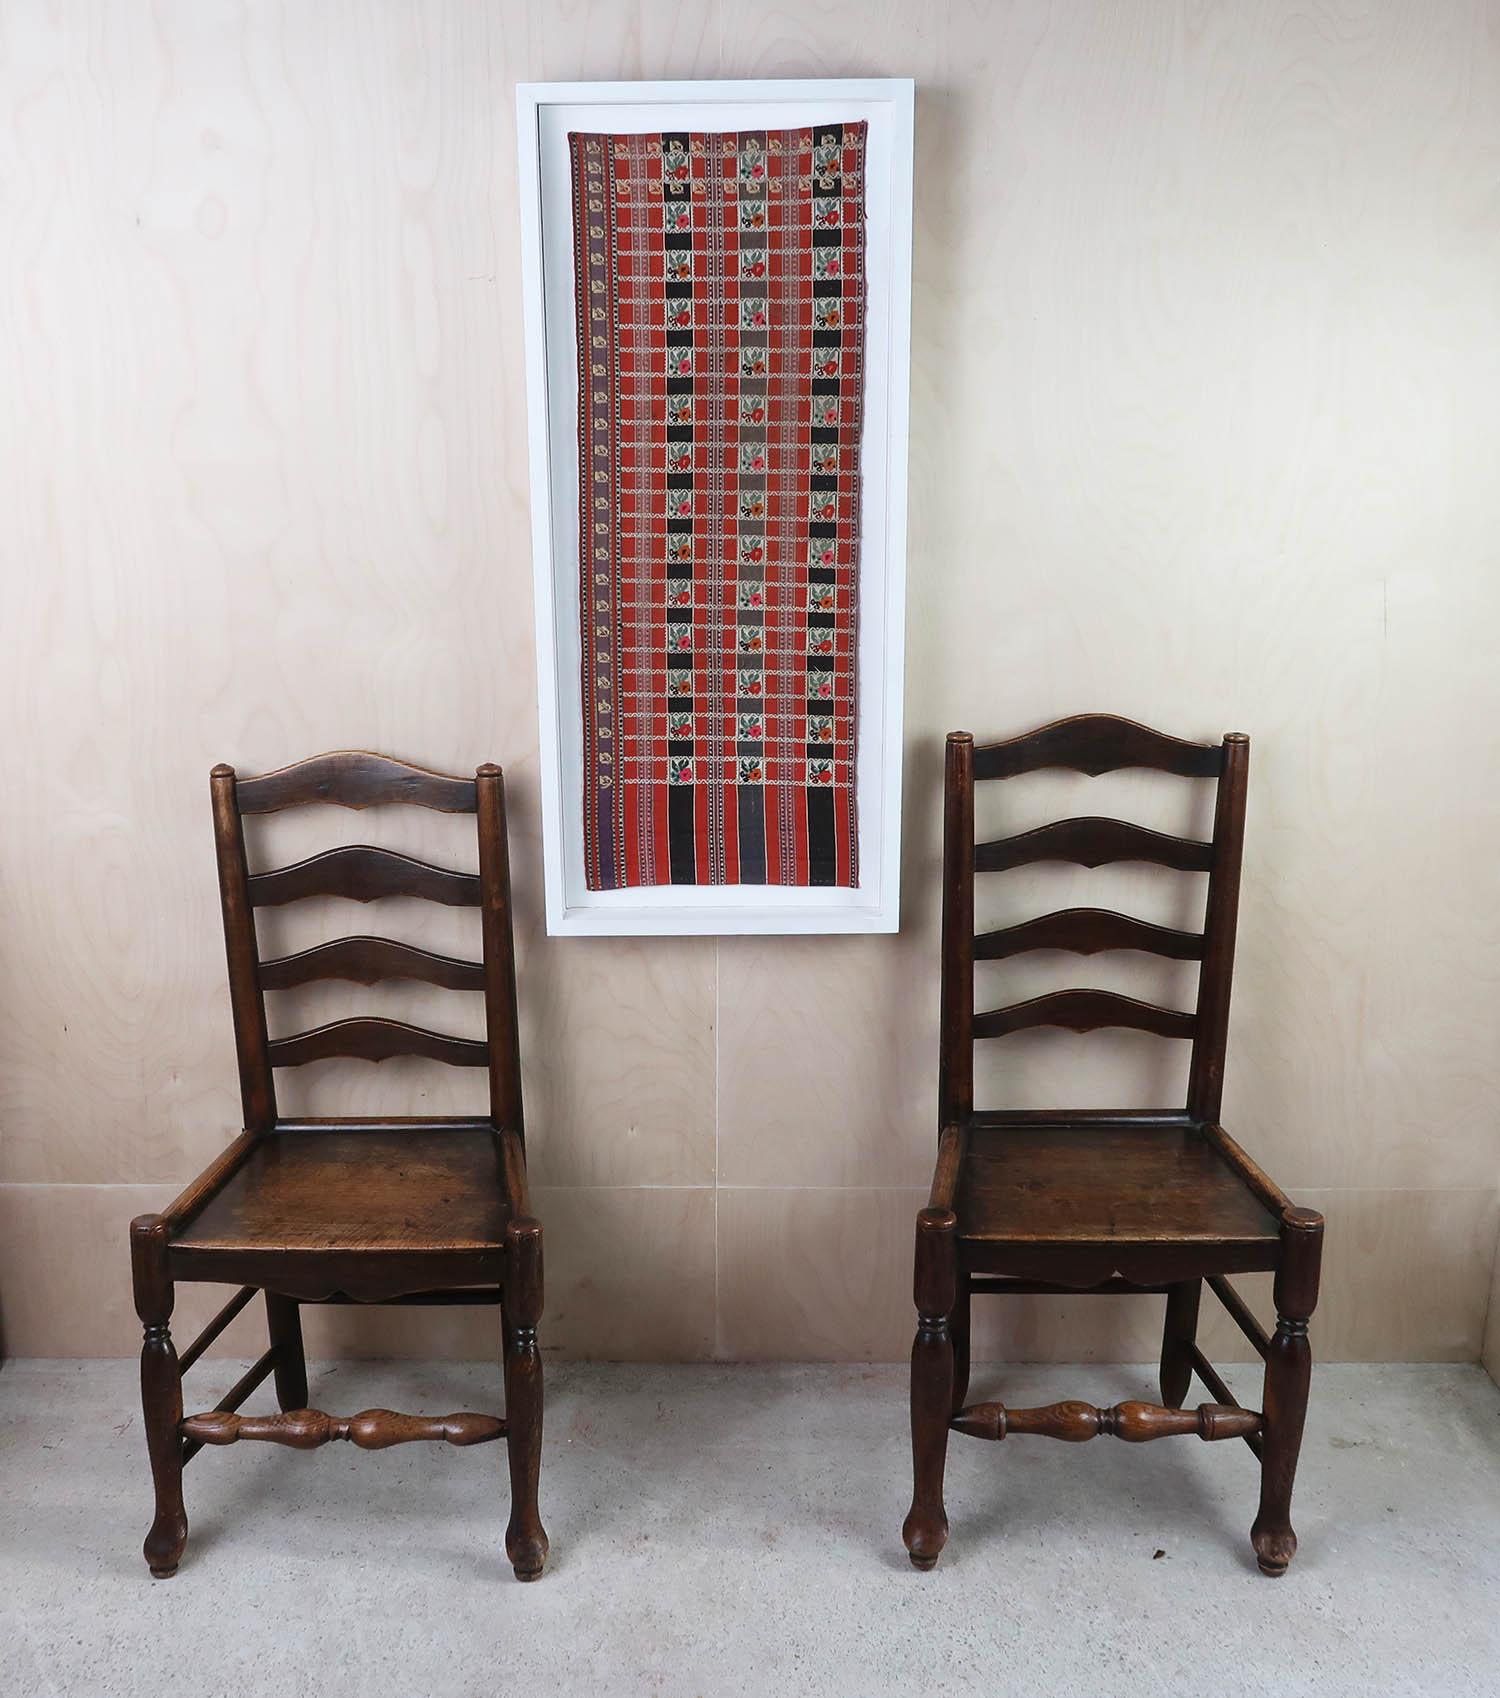 Near Pair of Antique Welsh Country Ladder back Chairs. C.1800 (Volkskunst) im Angebot